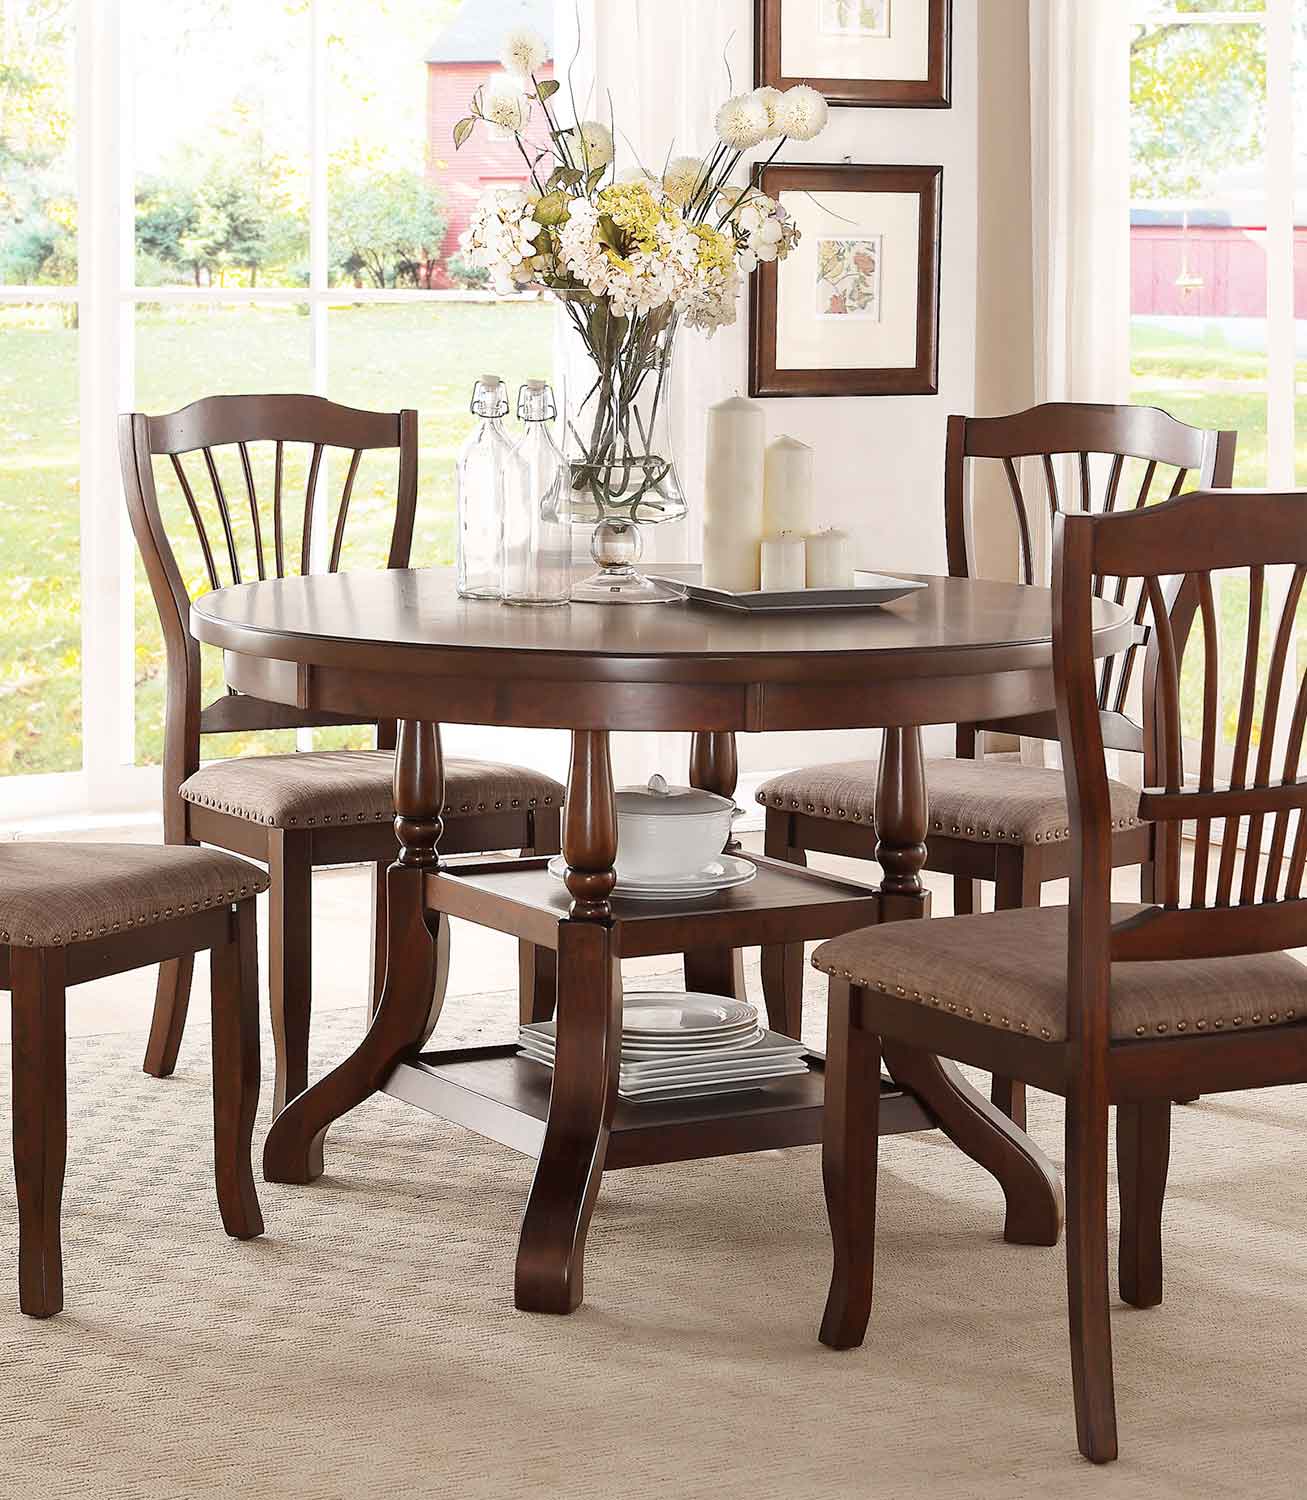 Homelegance Frankford Round Dining Table - Brown